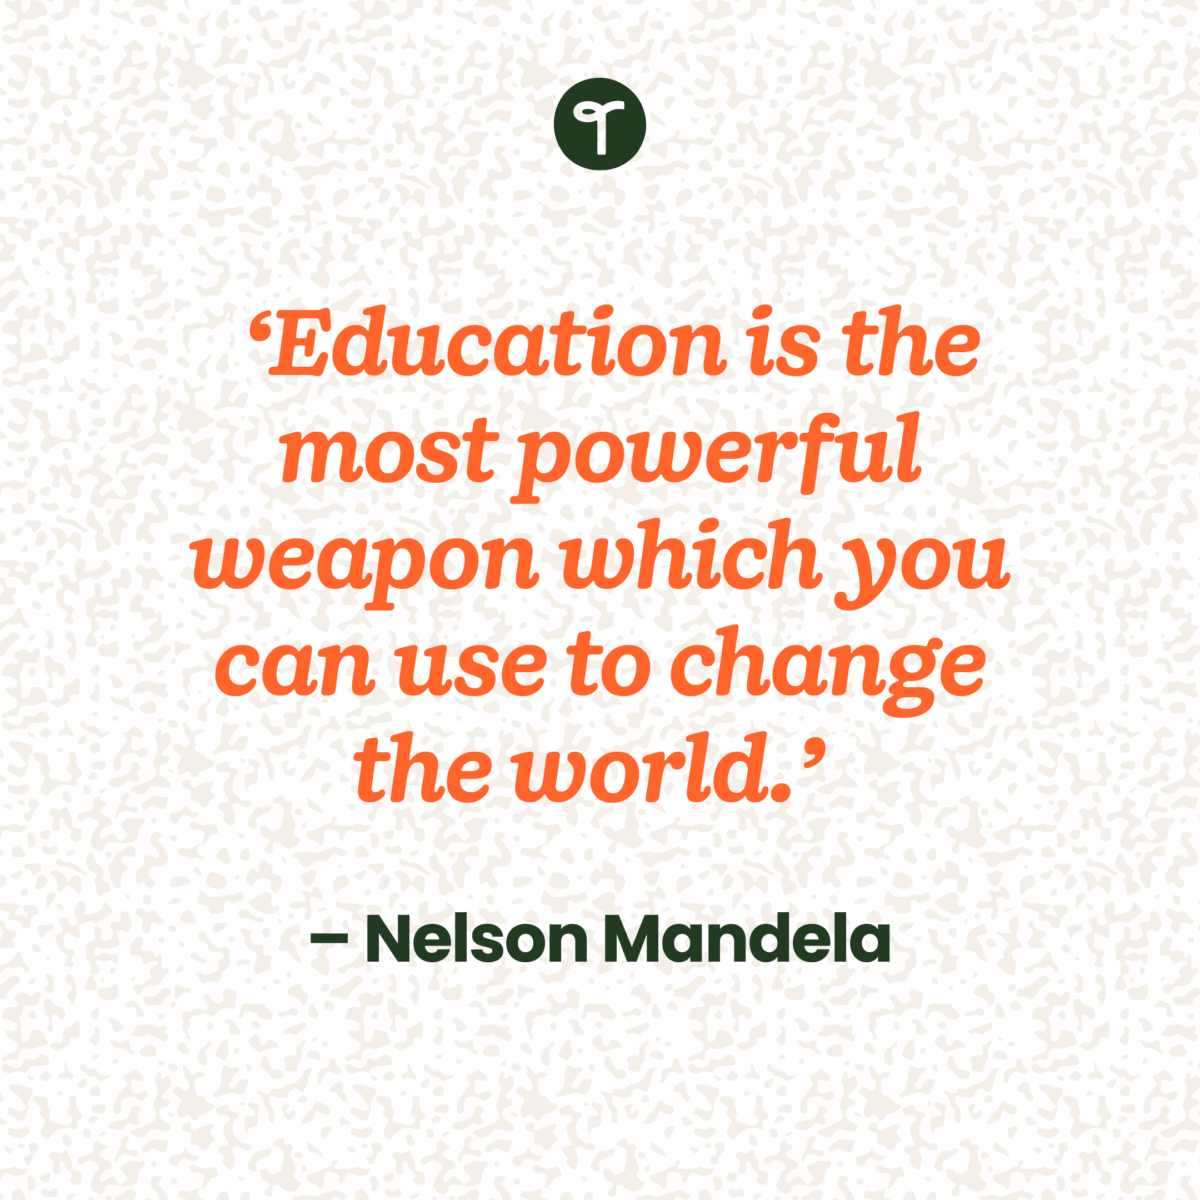 teacher quote 'Education is the most powerful weapon which you can use to change the world.' — Nelson Mandela written in orange on a cream patterned background